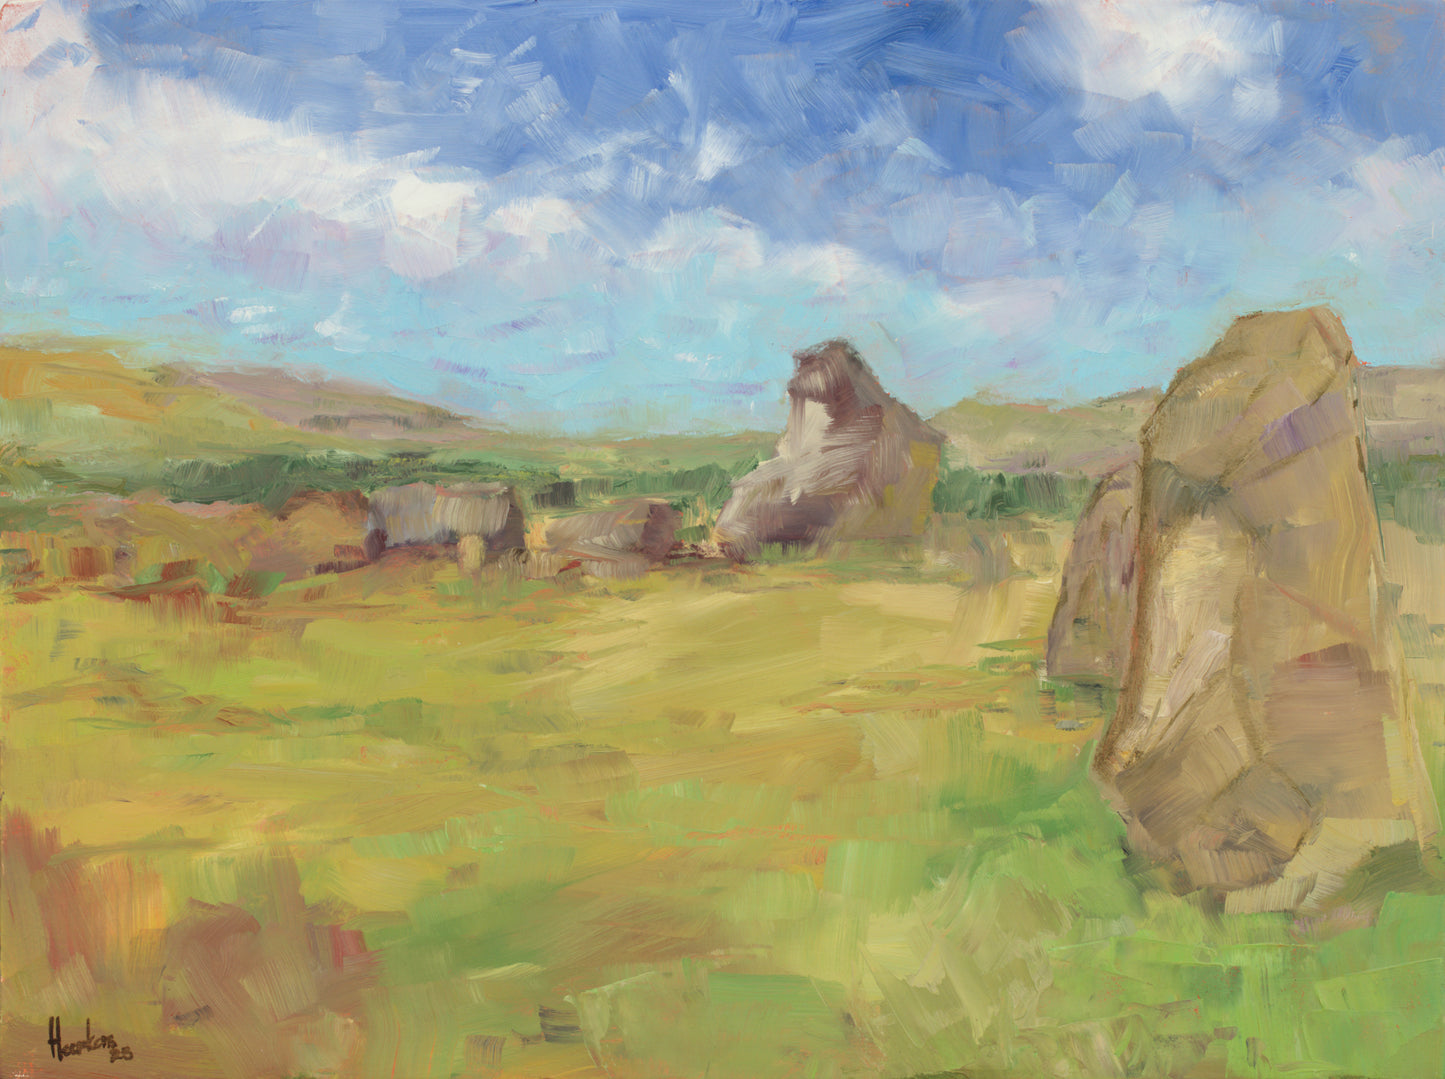 Castlerigg Stone Circle Keswick, Cumbria. Neolithic. Oil on panel 12 x 16" One of a kind original impressionistic oil painting